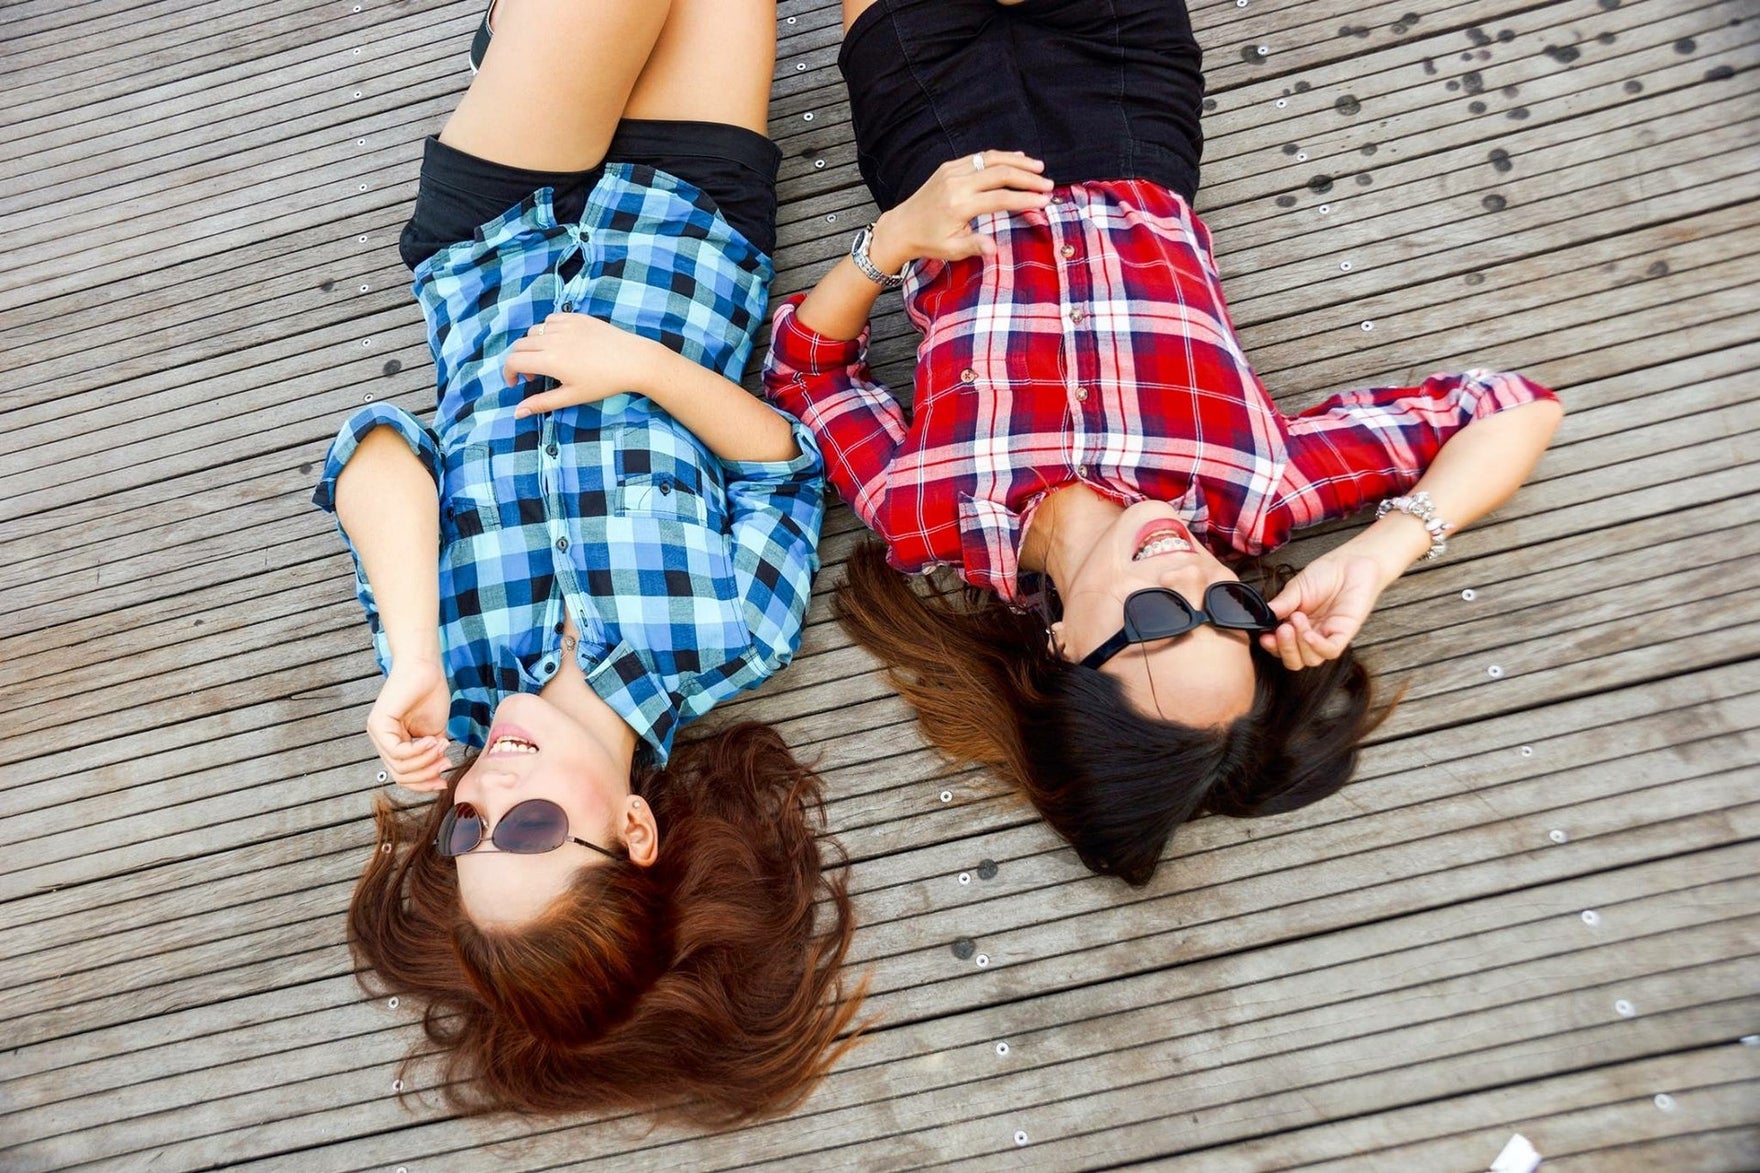 Two friends in sunglasses lie on their backs outside smiling